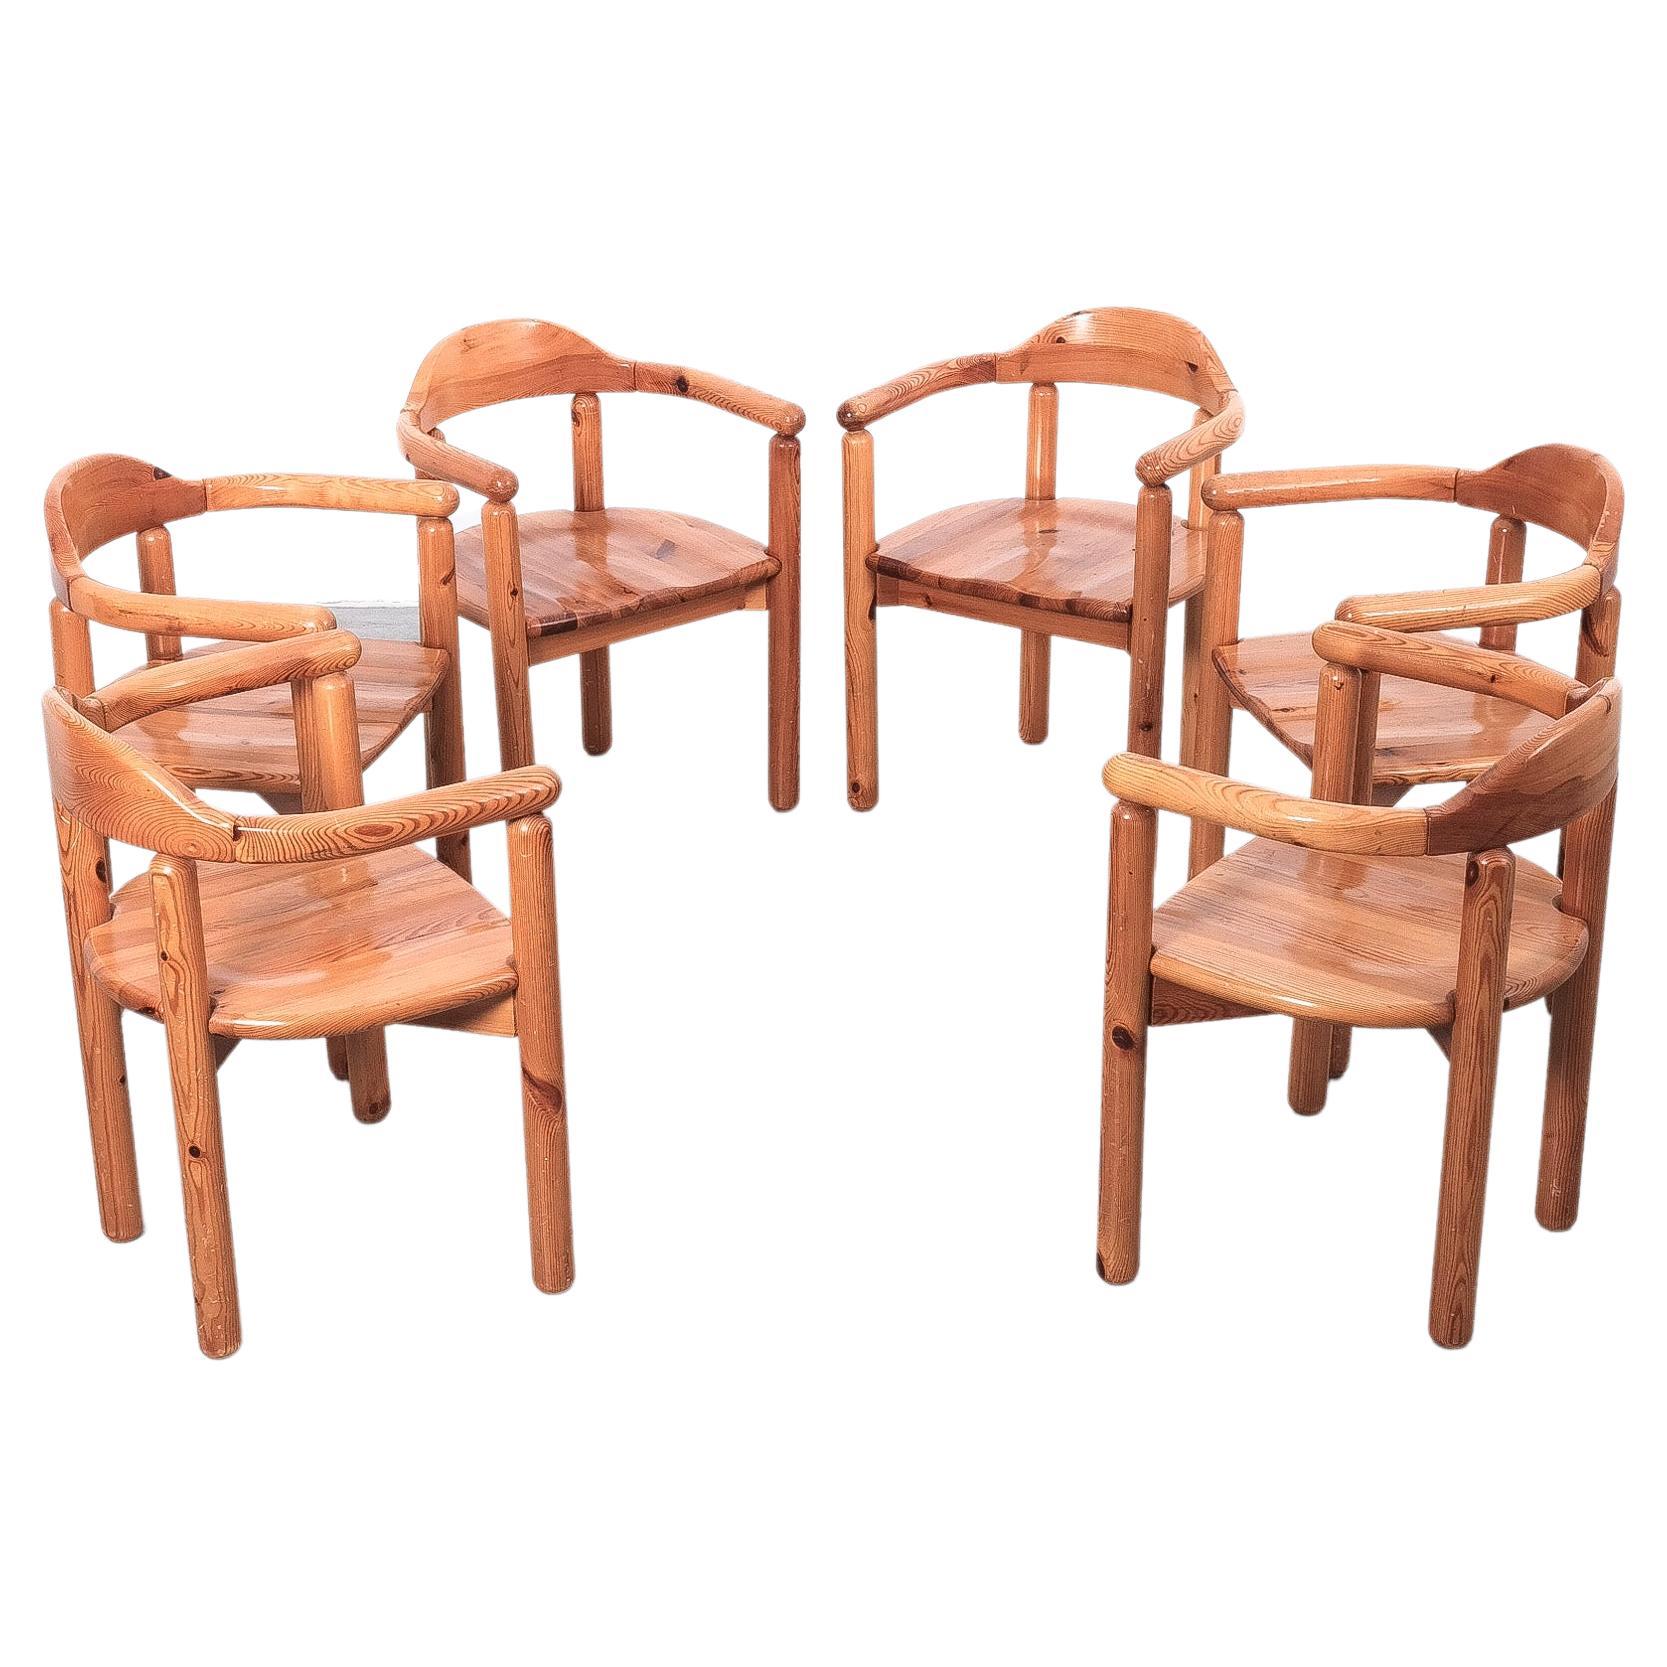 Rainer Daumiller Solid Pine Wood Dining Chairs '6' Danish Design, 1970 For Sale